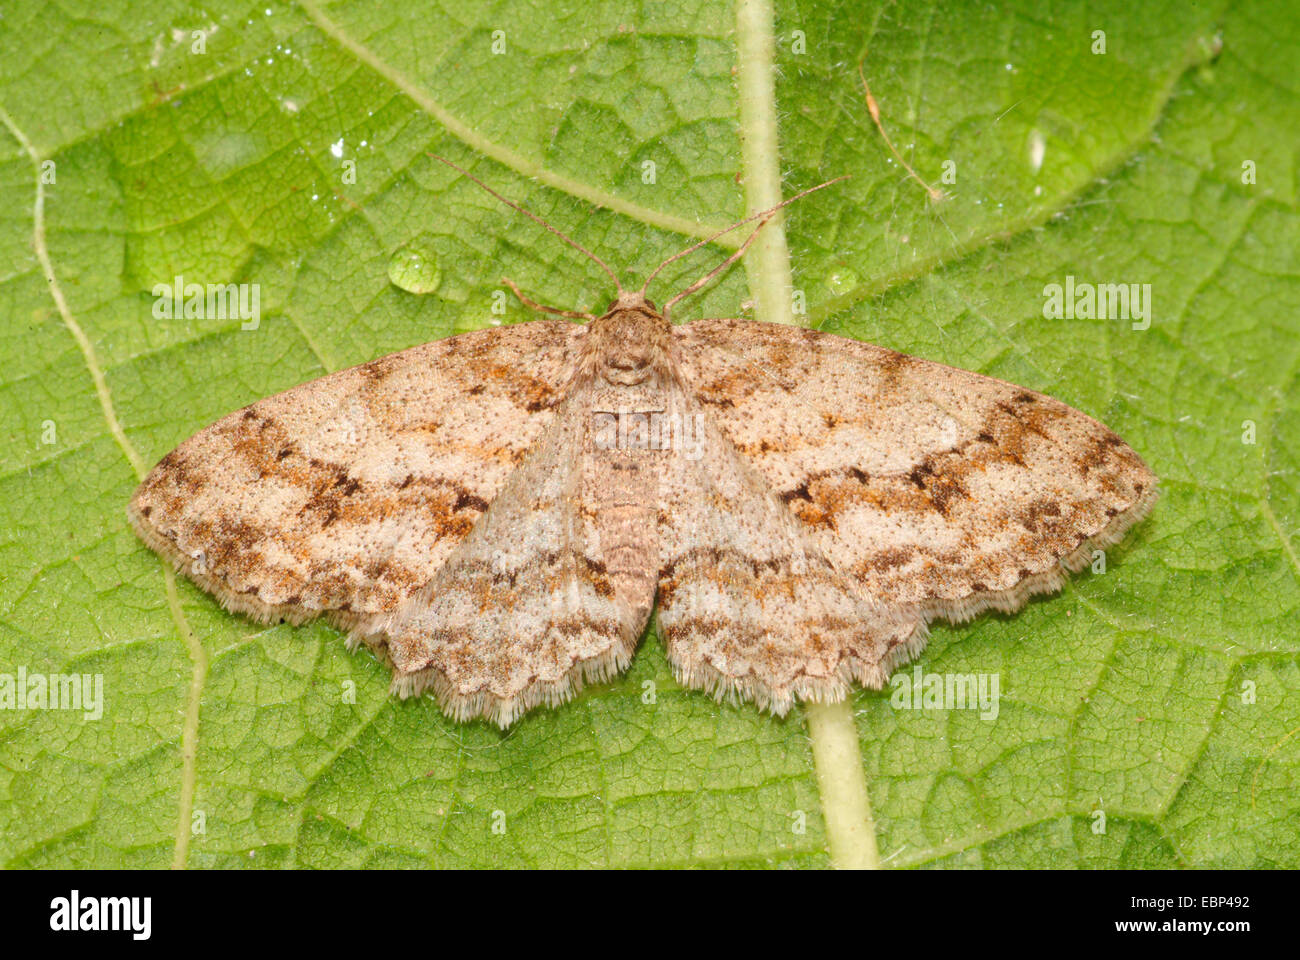 larch looper, blueberry lopper, fir looper, plum looper (Ectropis crepuscularia, Ectropis bistortata), on a leaf, Germany Stock Photo